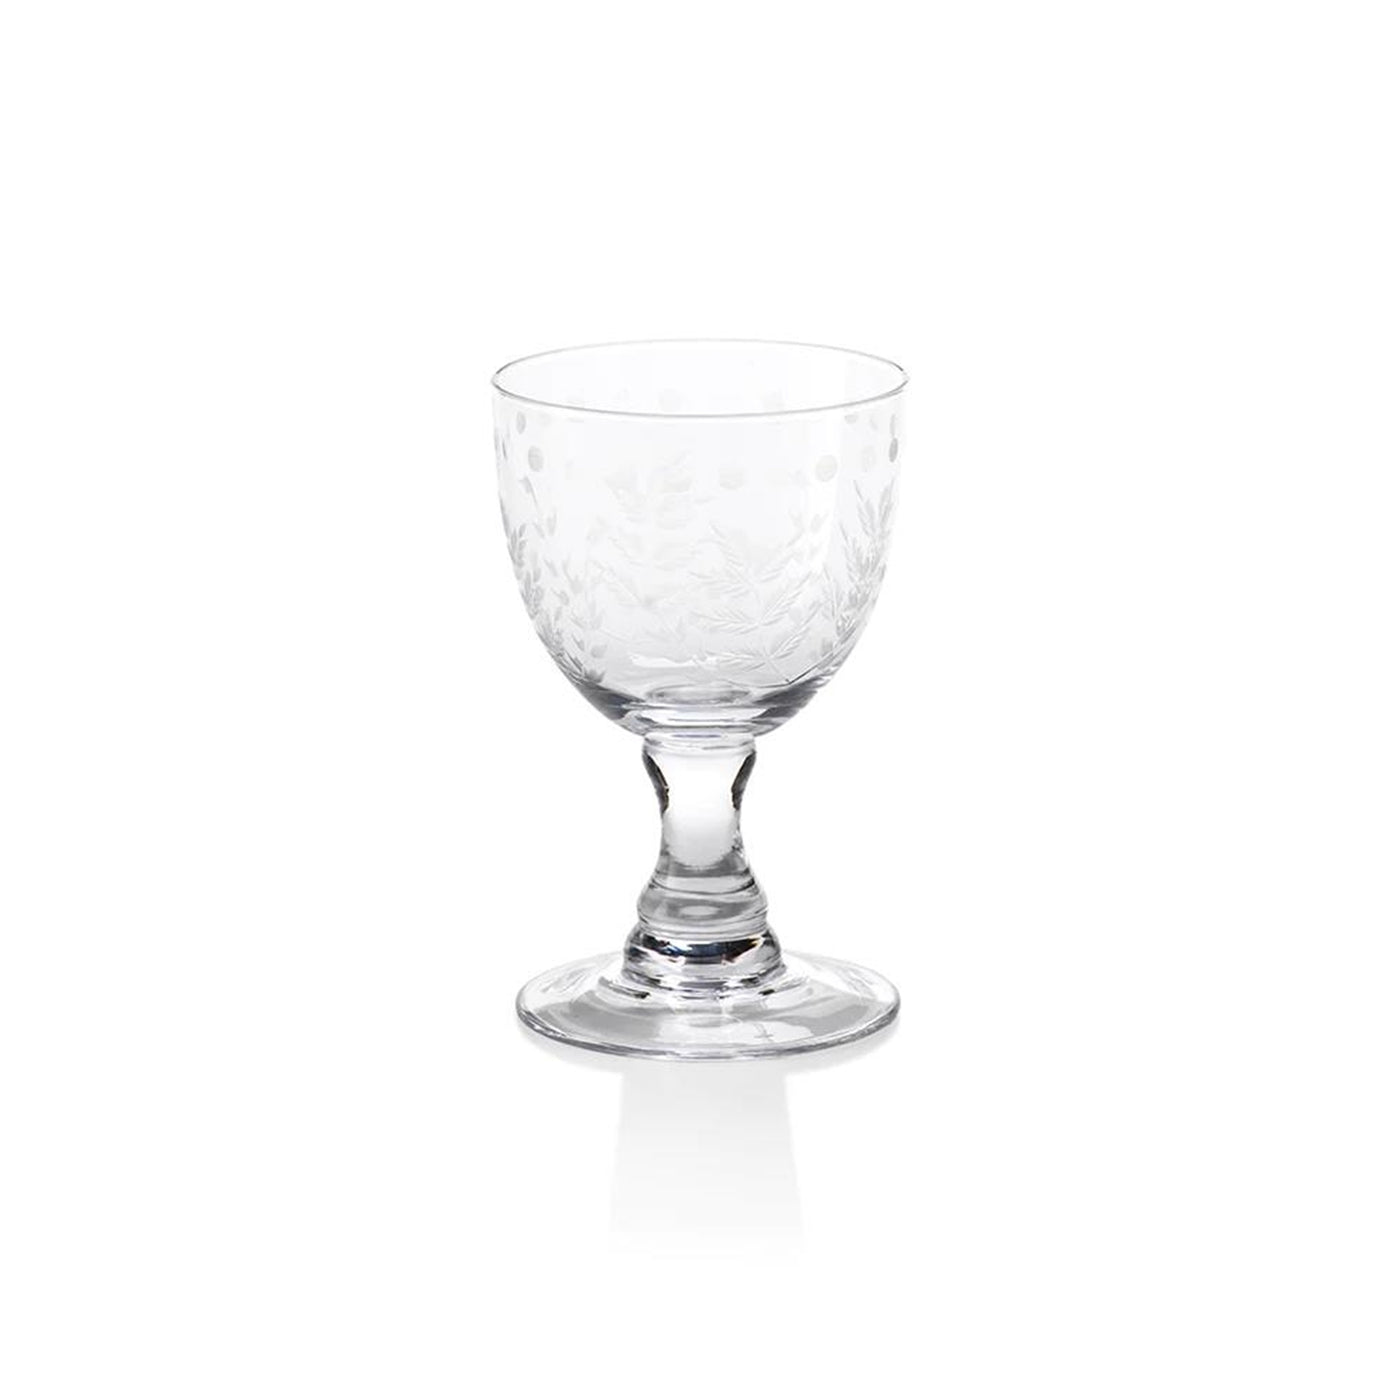 Spring Leaves Cut Design White Wine Glass - cannot ship